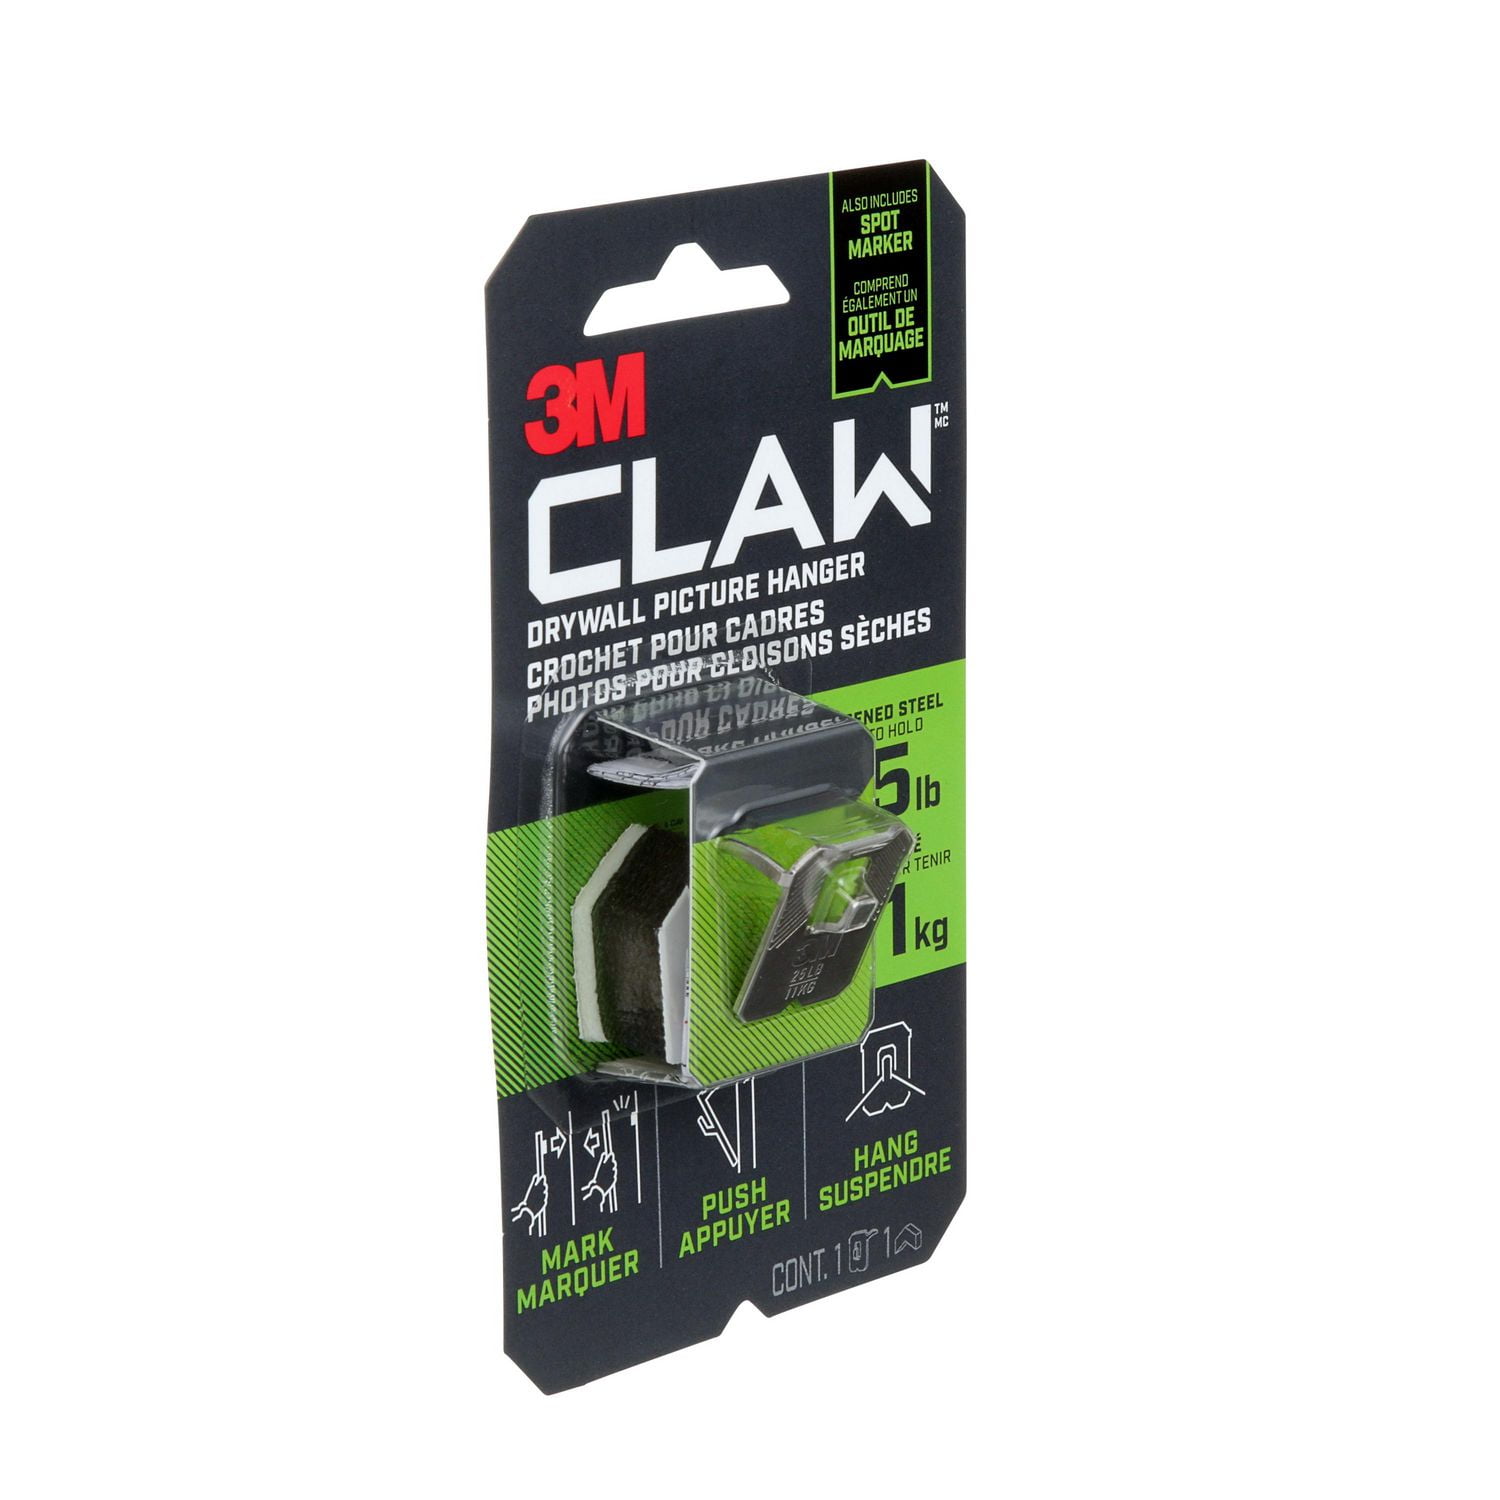 3M CLAW Drywall Picture Hanger with Temporary Spot Marker, Holds 65 lbs, 2  Hangers, 2 Markers